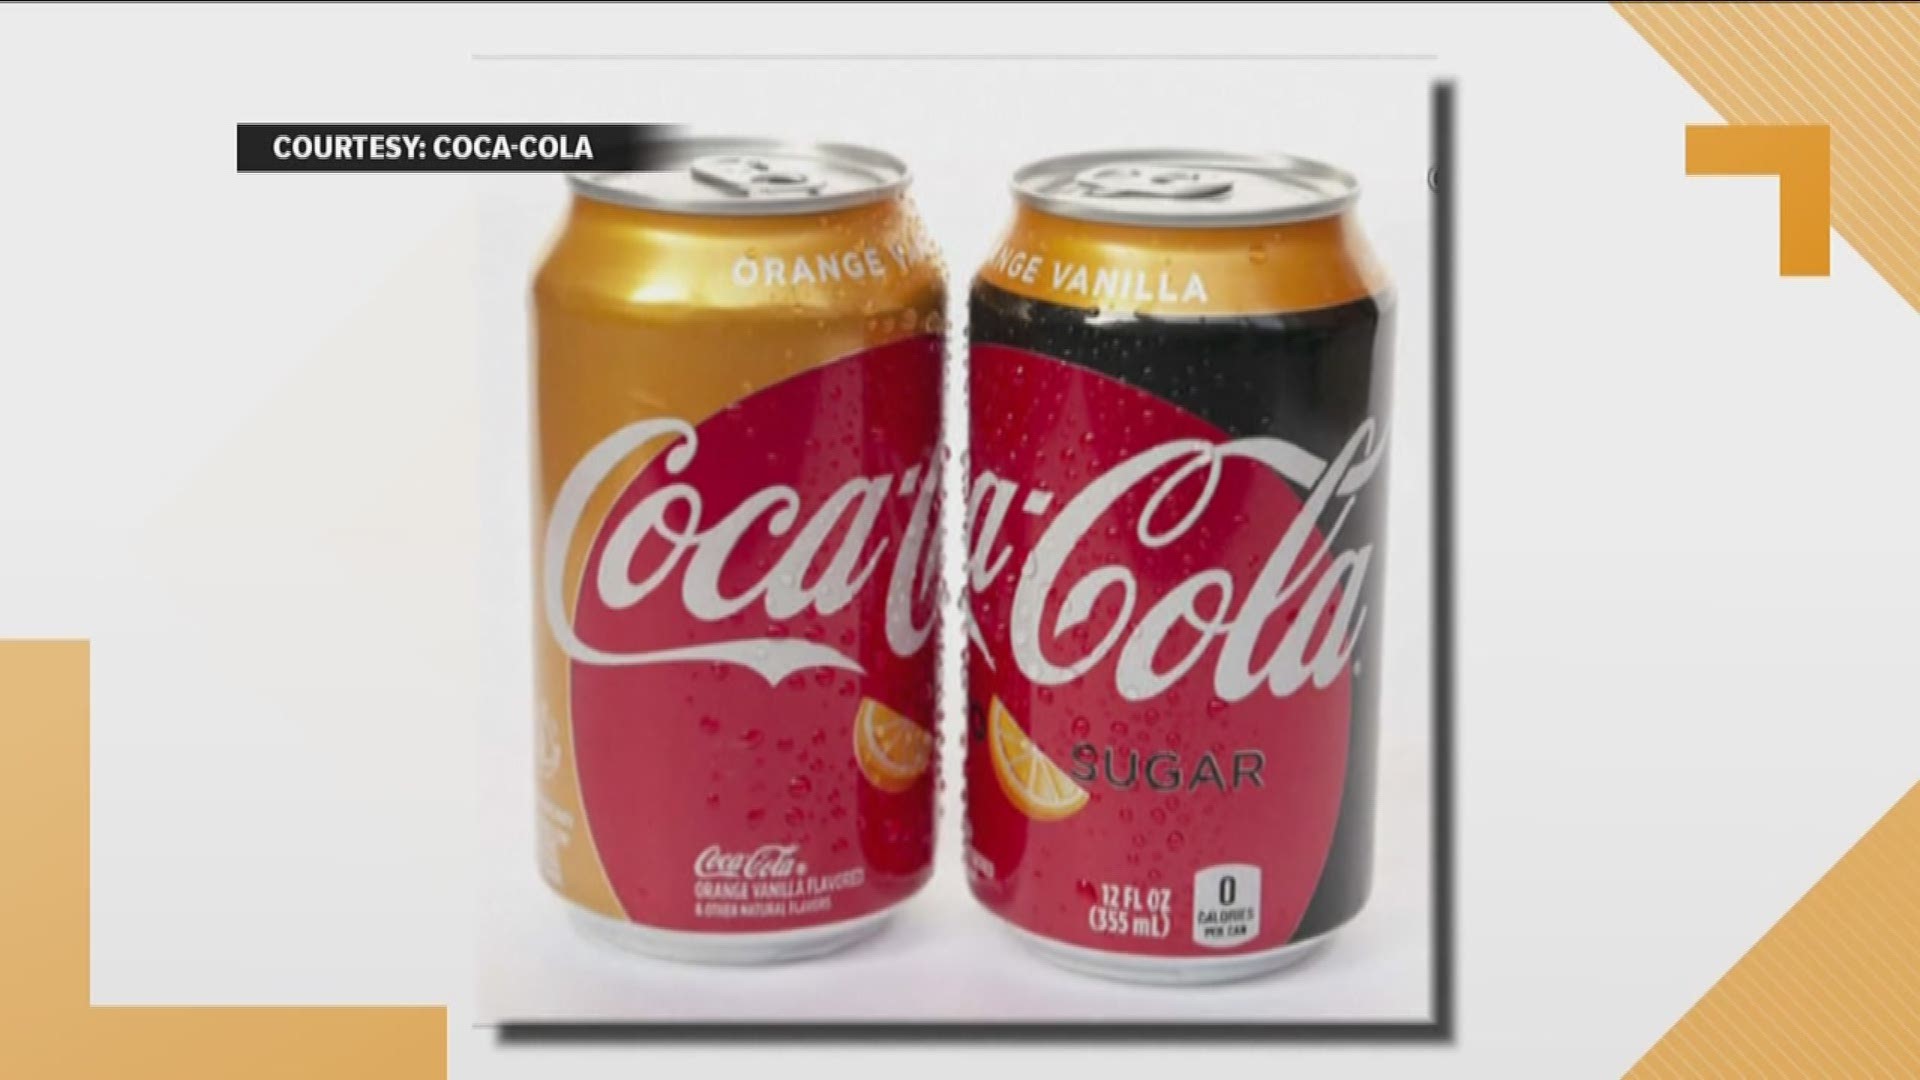 Coca-Cola is launching a new flavor, Orange Vanilla! The company has not launched a new can flavor since Vanilla Coke in 2007.